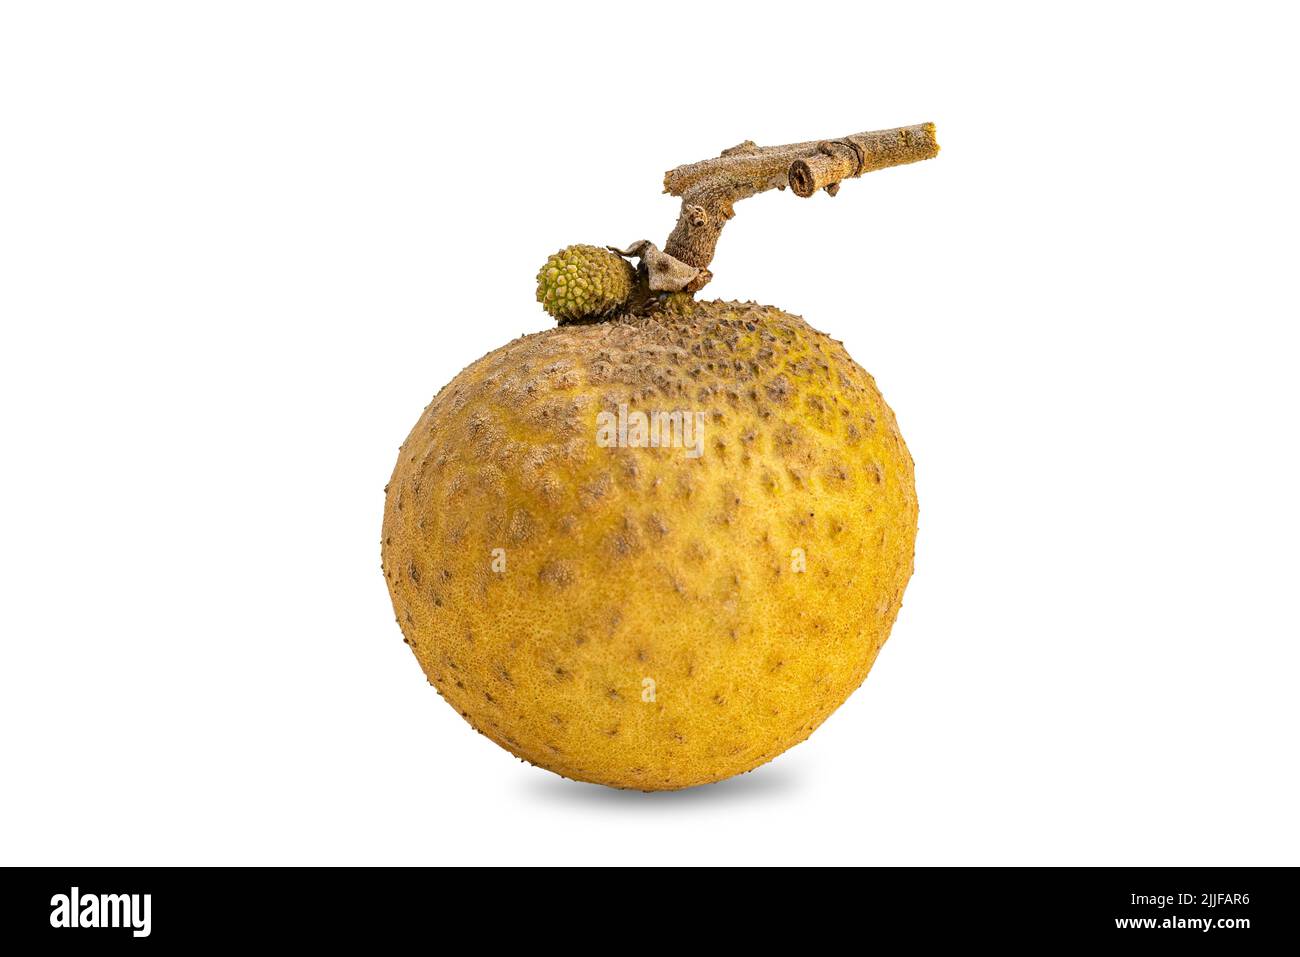 Side view of single ripe fresh longan fruit isolated on white background with clipping path. Stock Photo